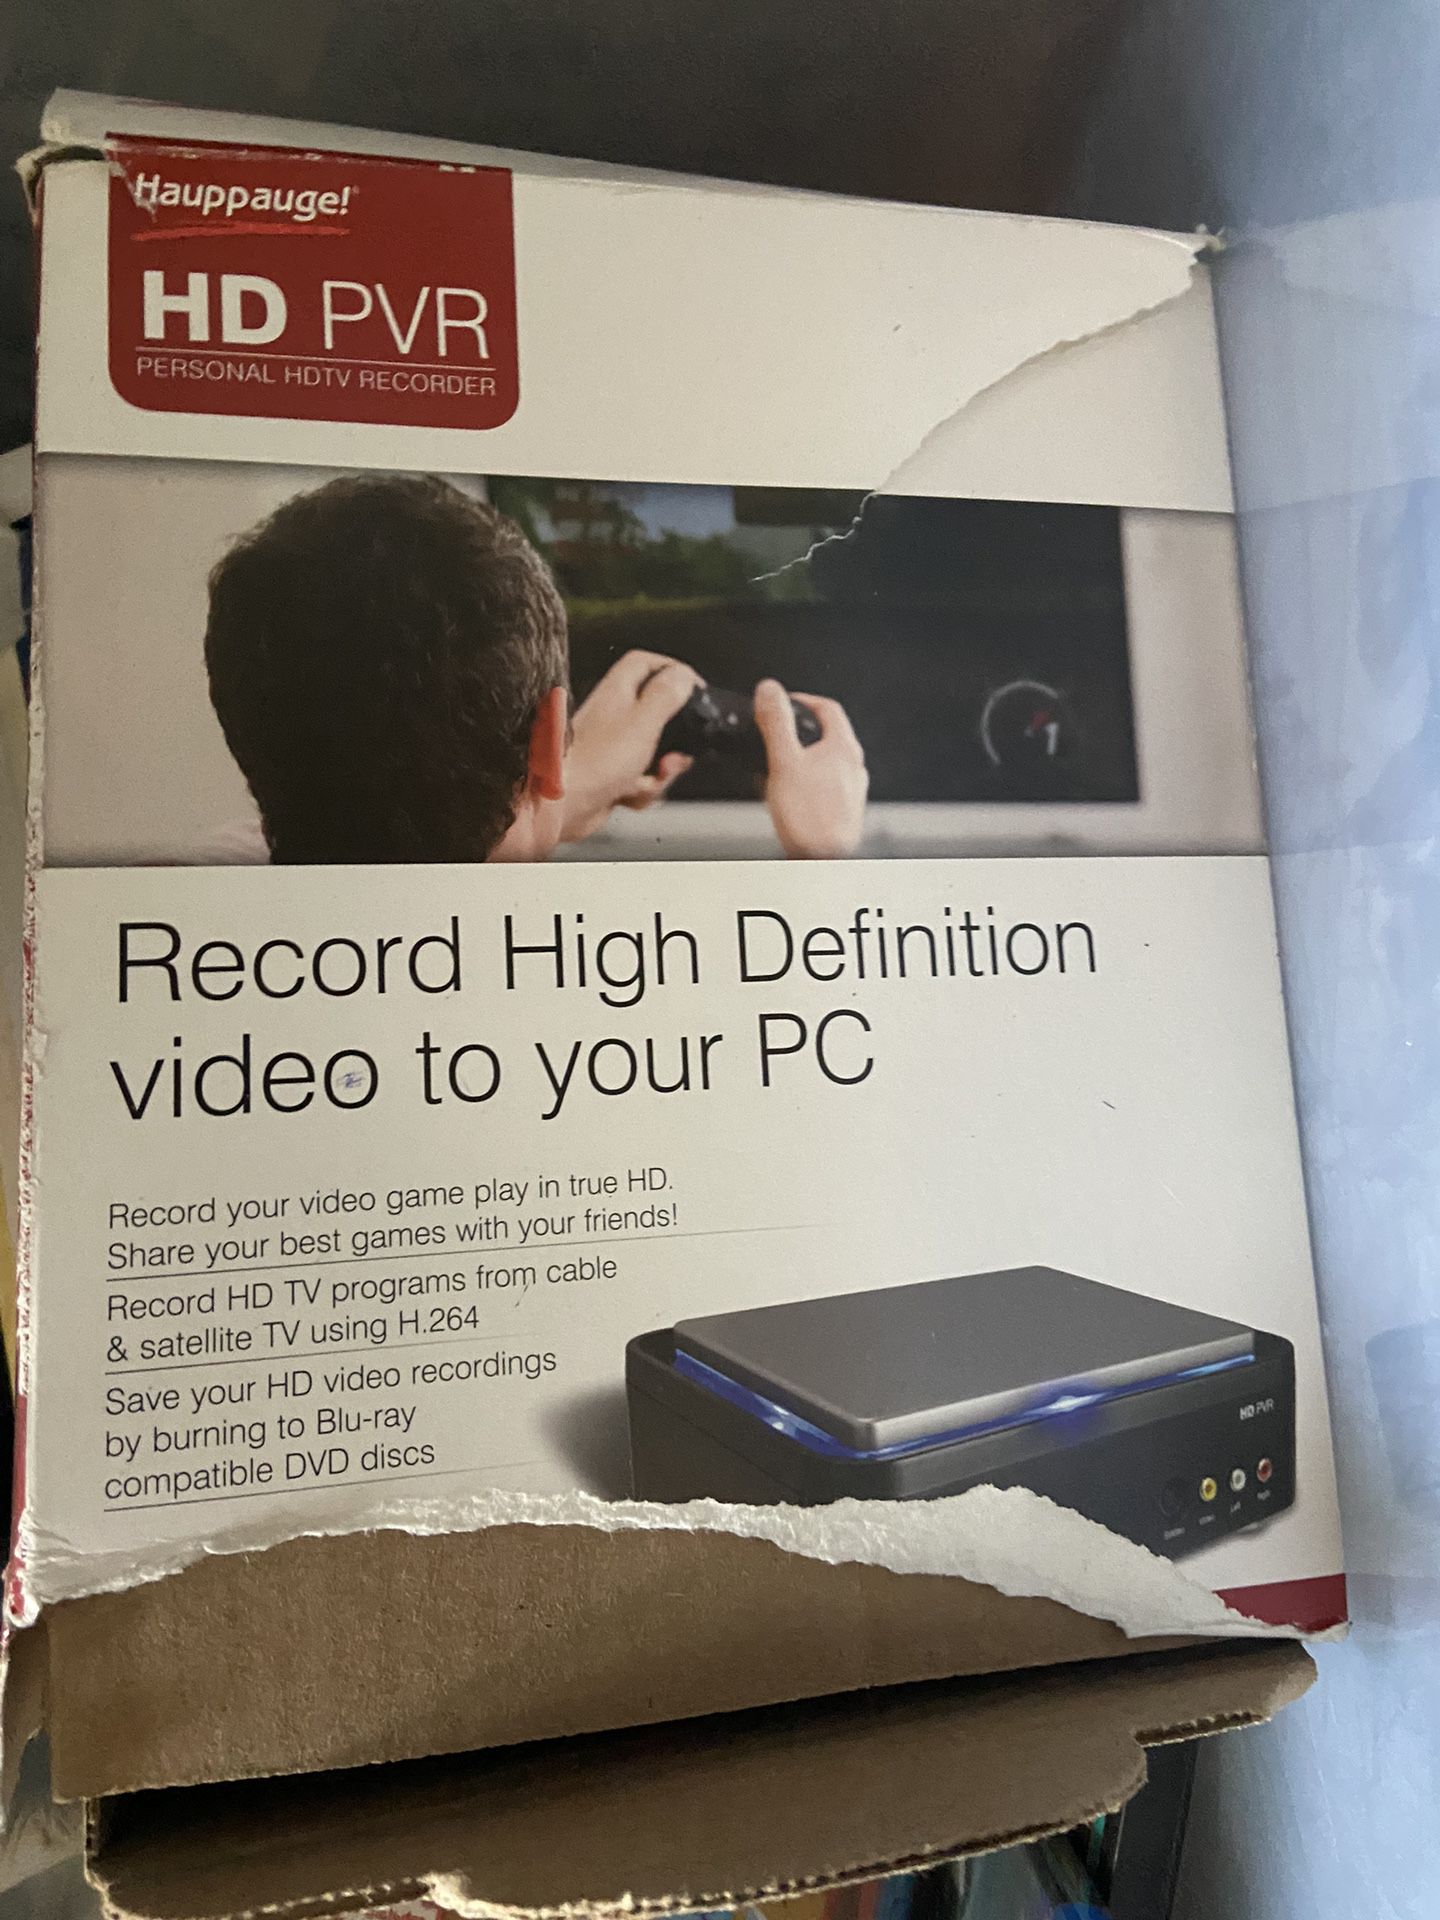 Happauge Hd Pvr For Xbox PlayStation & Nintendo Video Capture